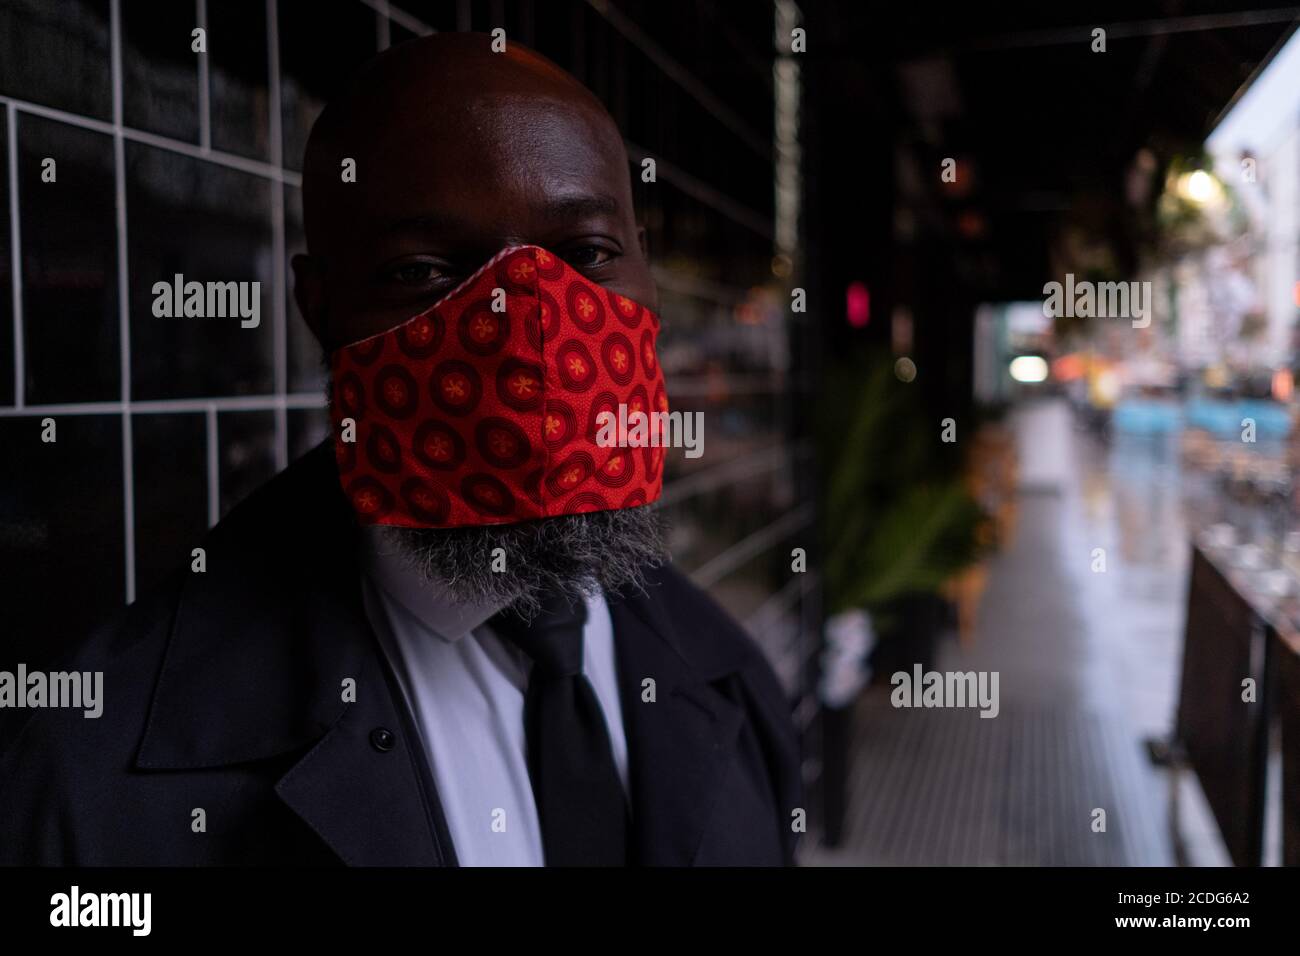 On a rainy night in Soho, security man 'H'  wears a bright red facial covering outside a business at a time when recently re-opened bars and restaurants are desperate for customer business during the coronavirus pandemic, on 27th August 2020, in London, England. Stock Photo